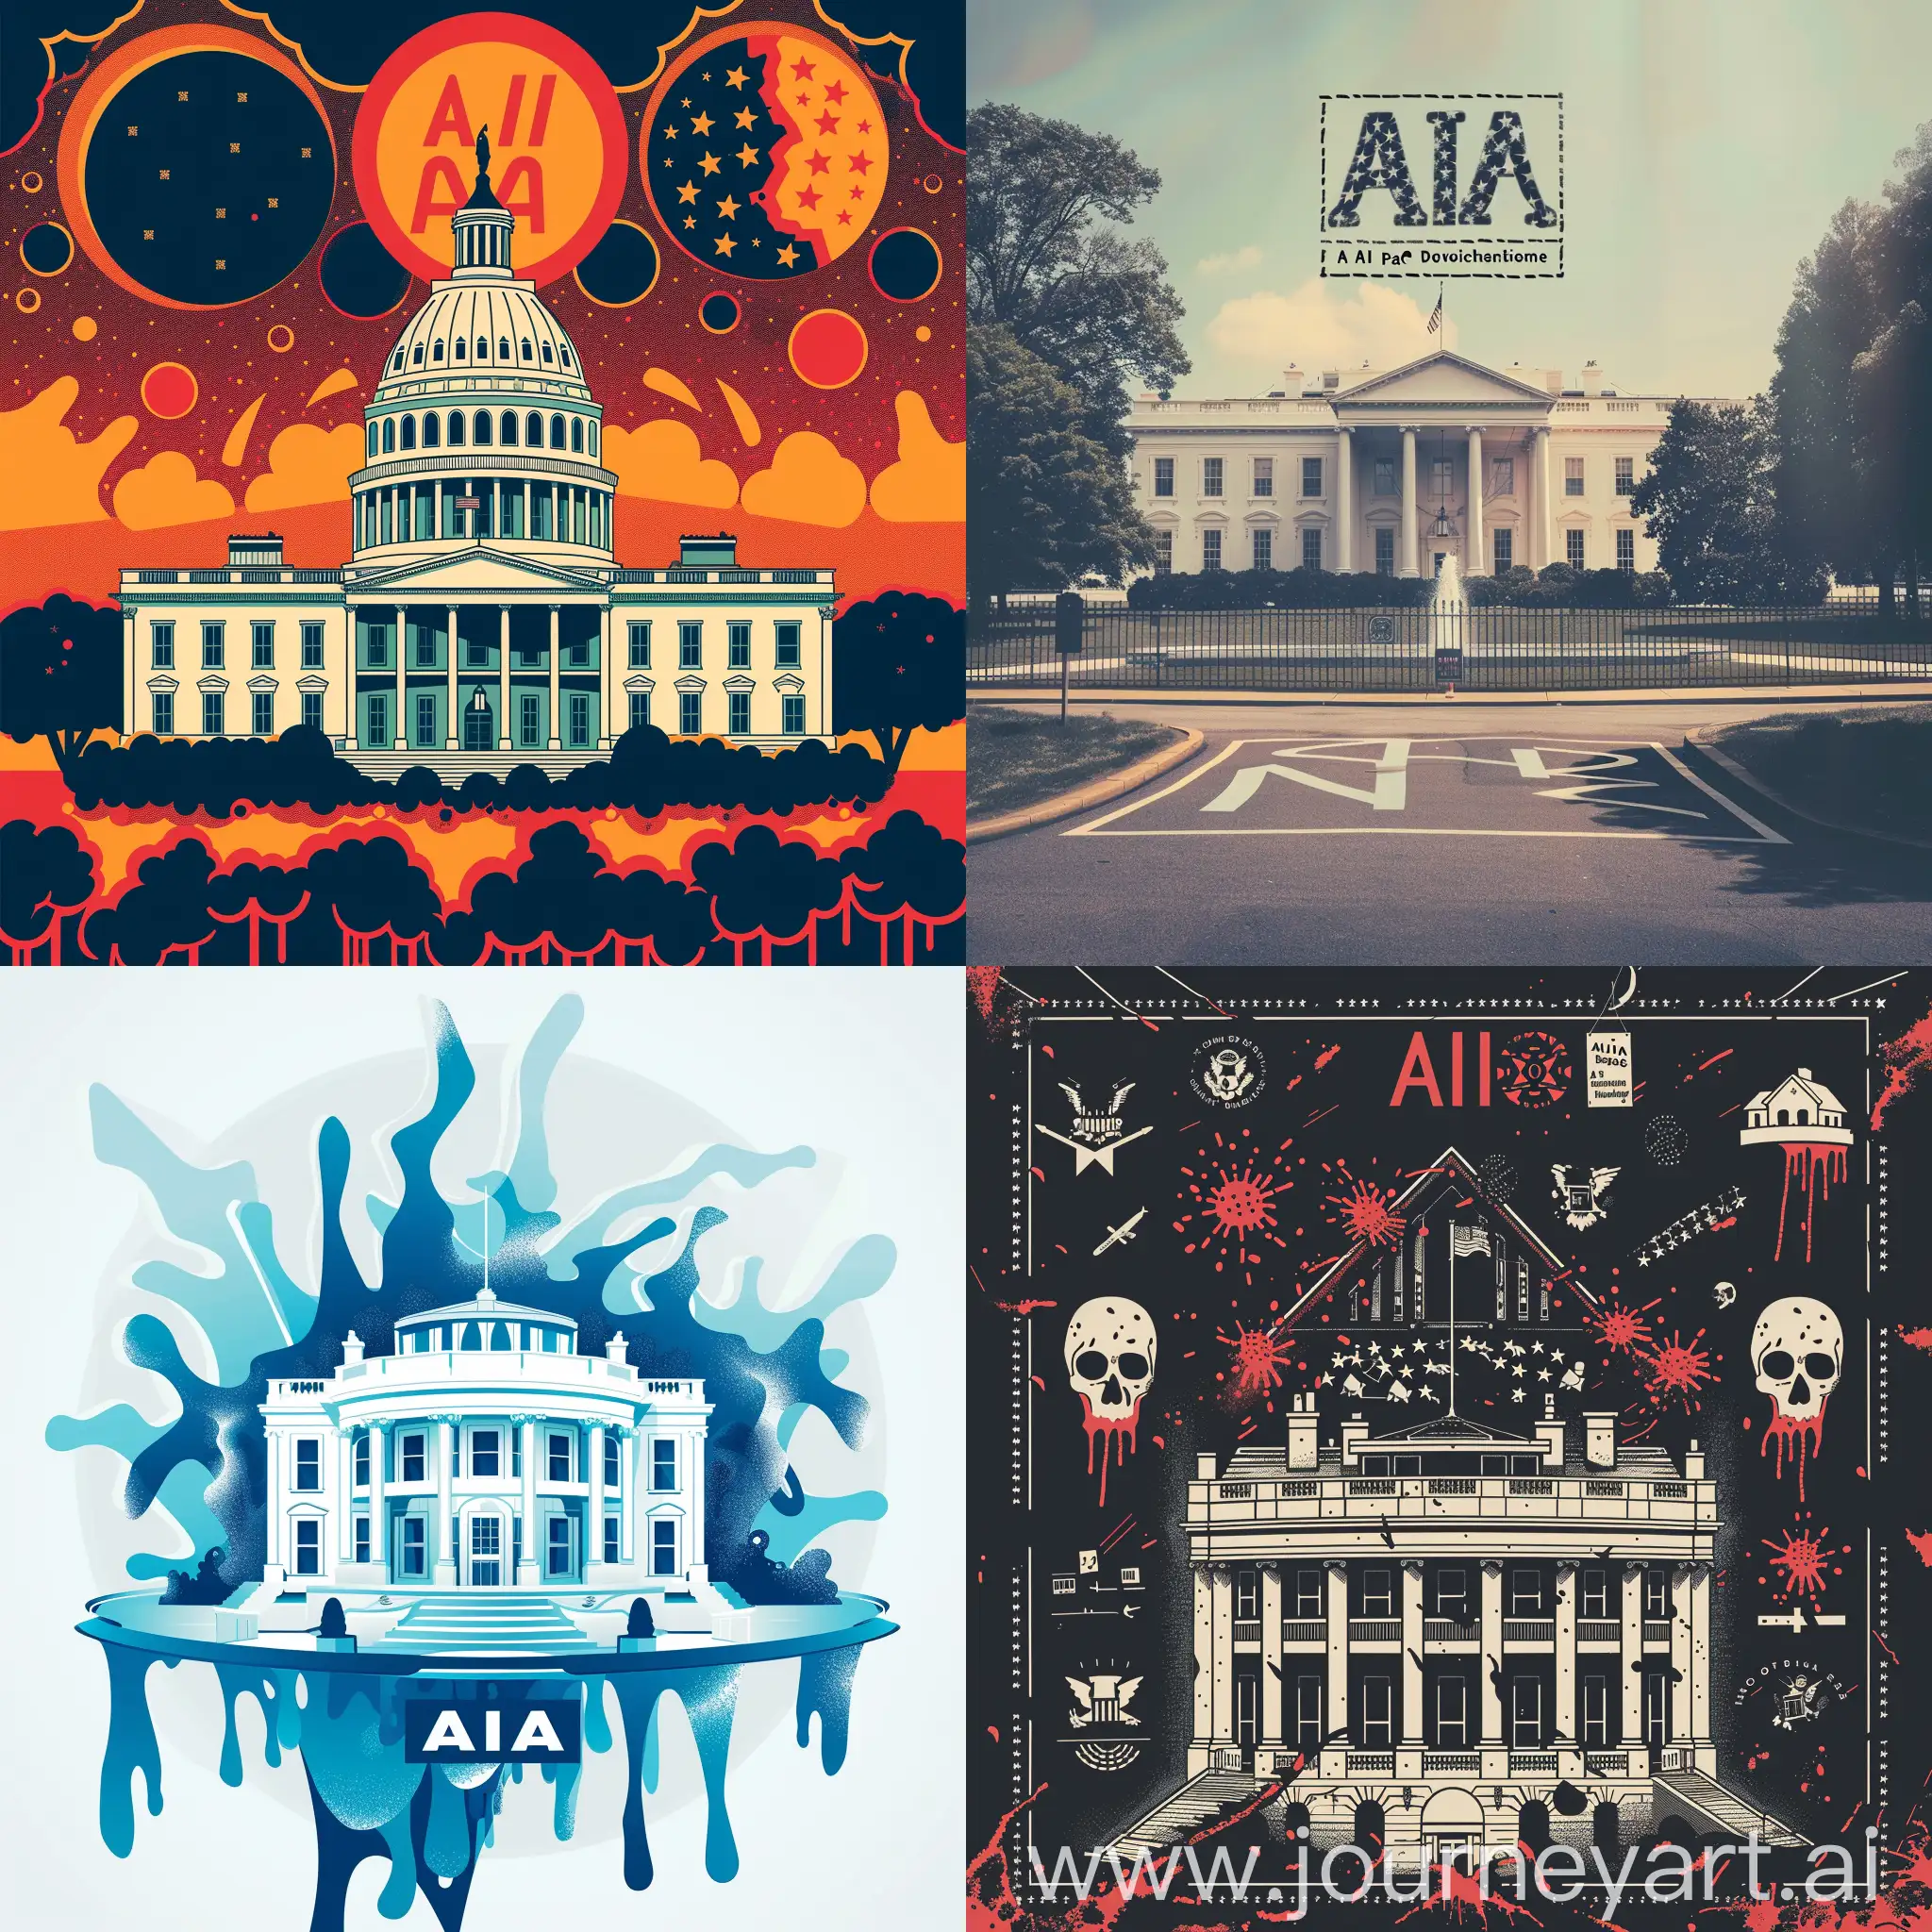 generate a protest poster with the theme: "AIPAC: A Plague on American Democracy" emphasize the idea of the plague and the motif of the white house